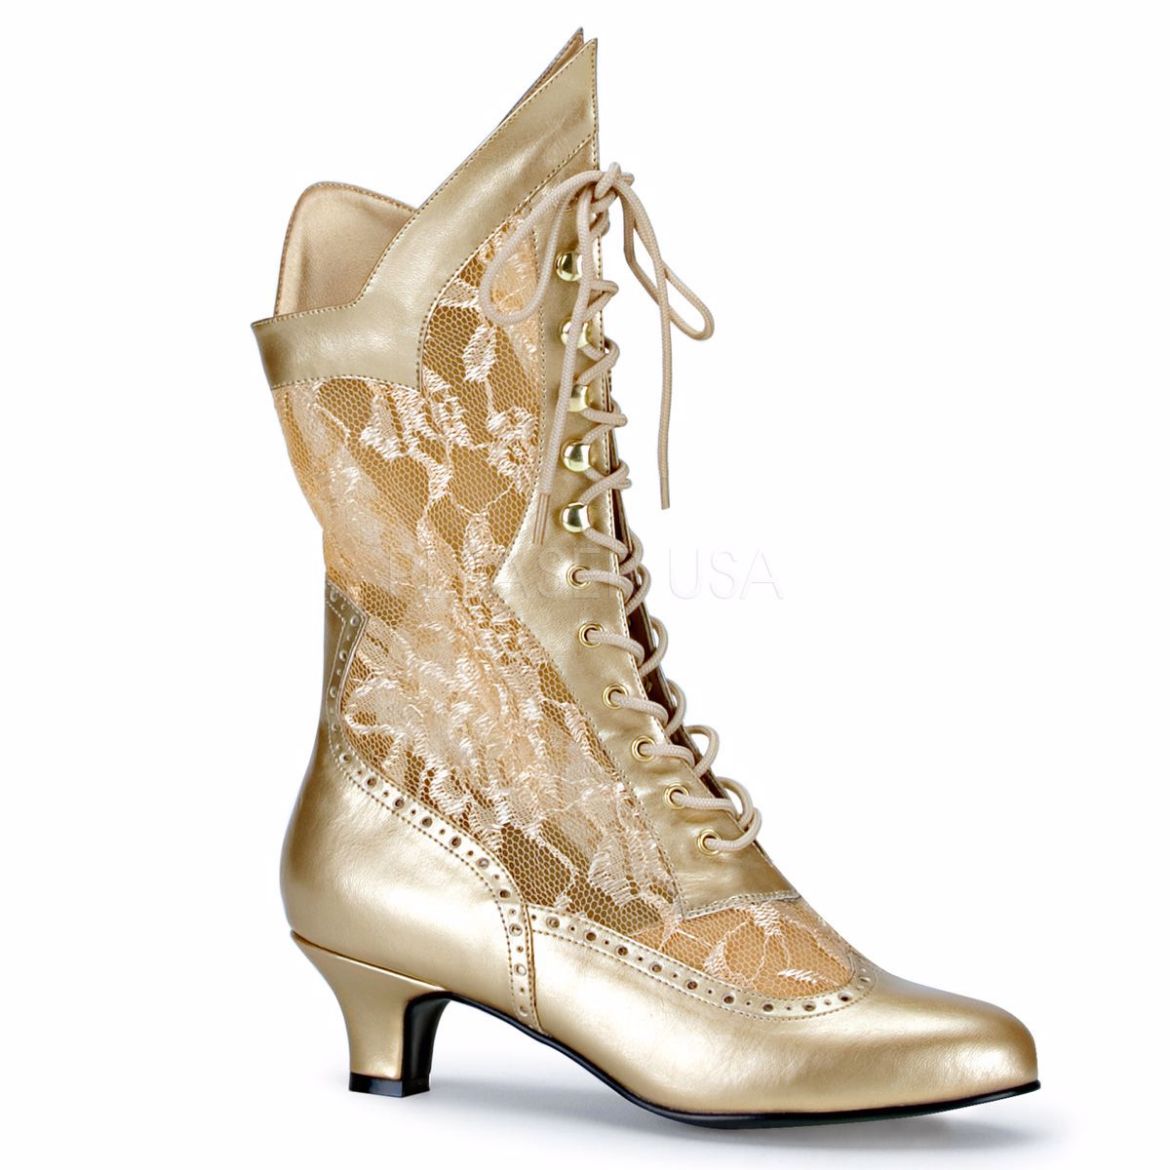 Product image of Funtasma Dame-115 Gold Pu-Lace, 2 inch (5.1 cm) Heel Ankle Boot